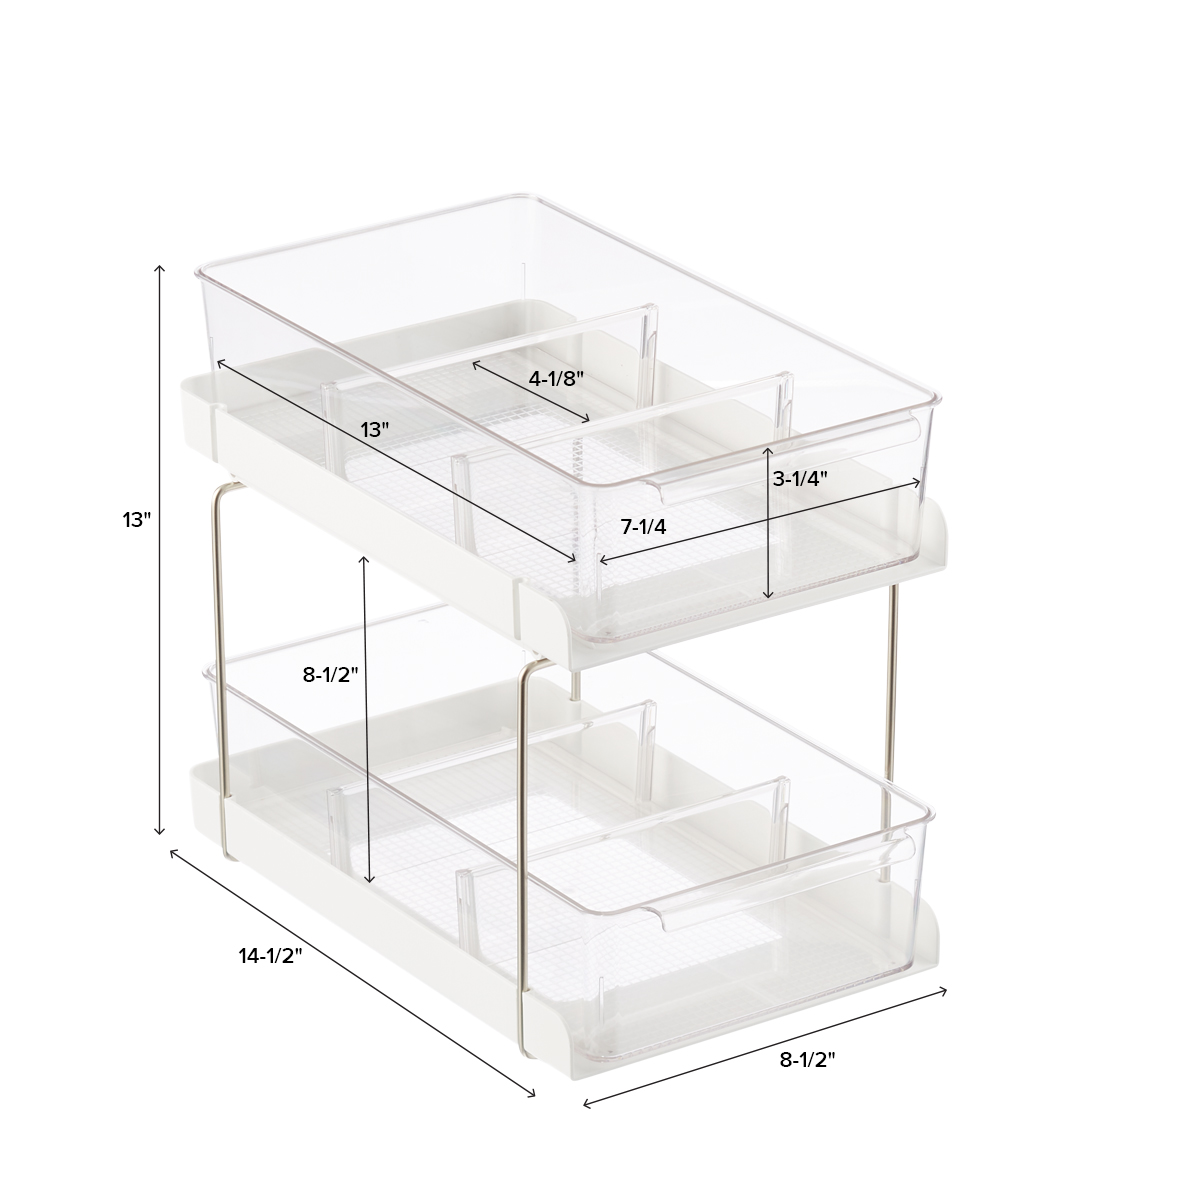 https://www.containerstore.com/catalogimages/449346/10083349-two-drawer-cabinet-organize.jpg